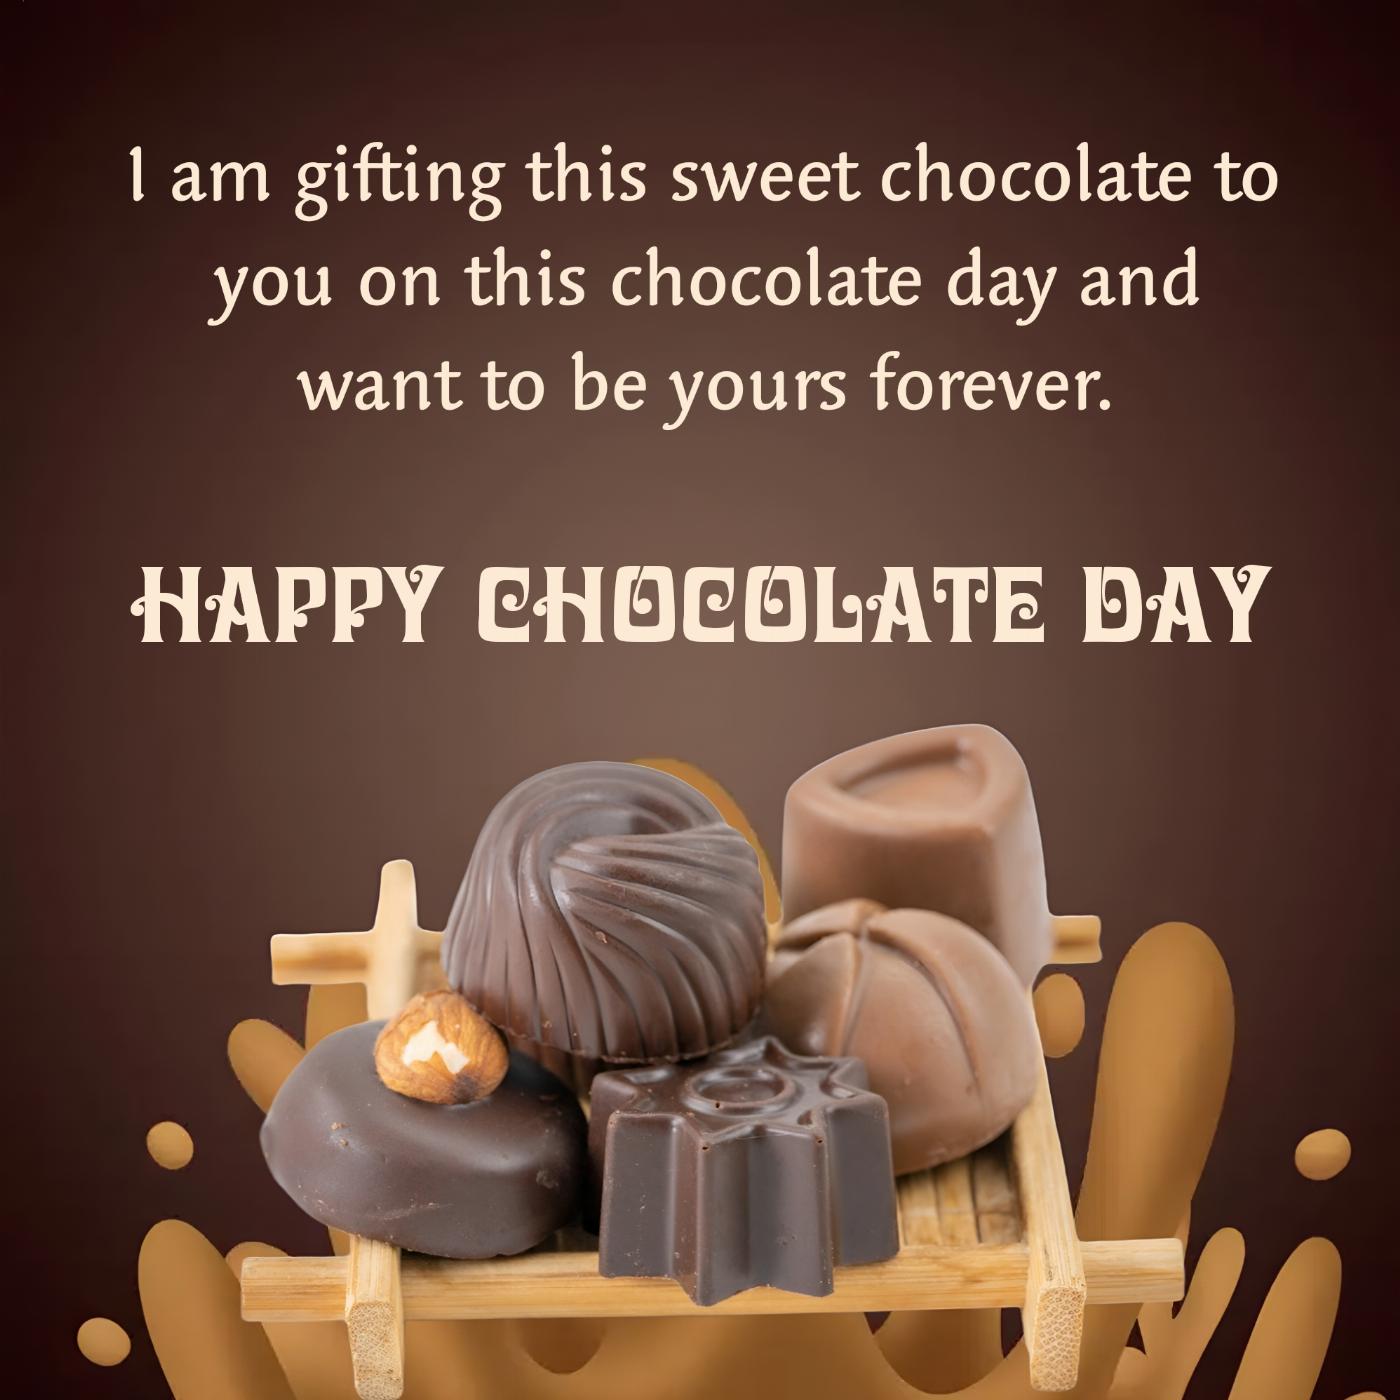 I am gifting this sweet chocolate to you on this chocolate day